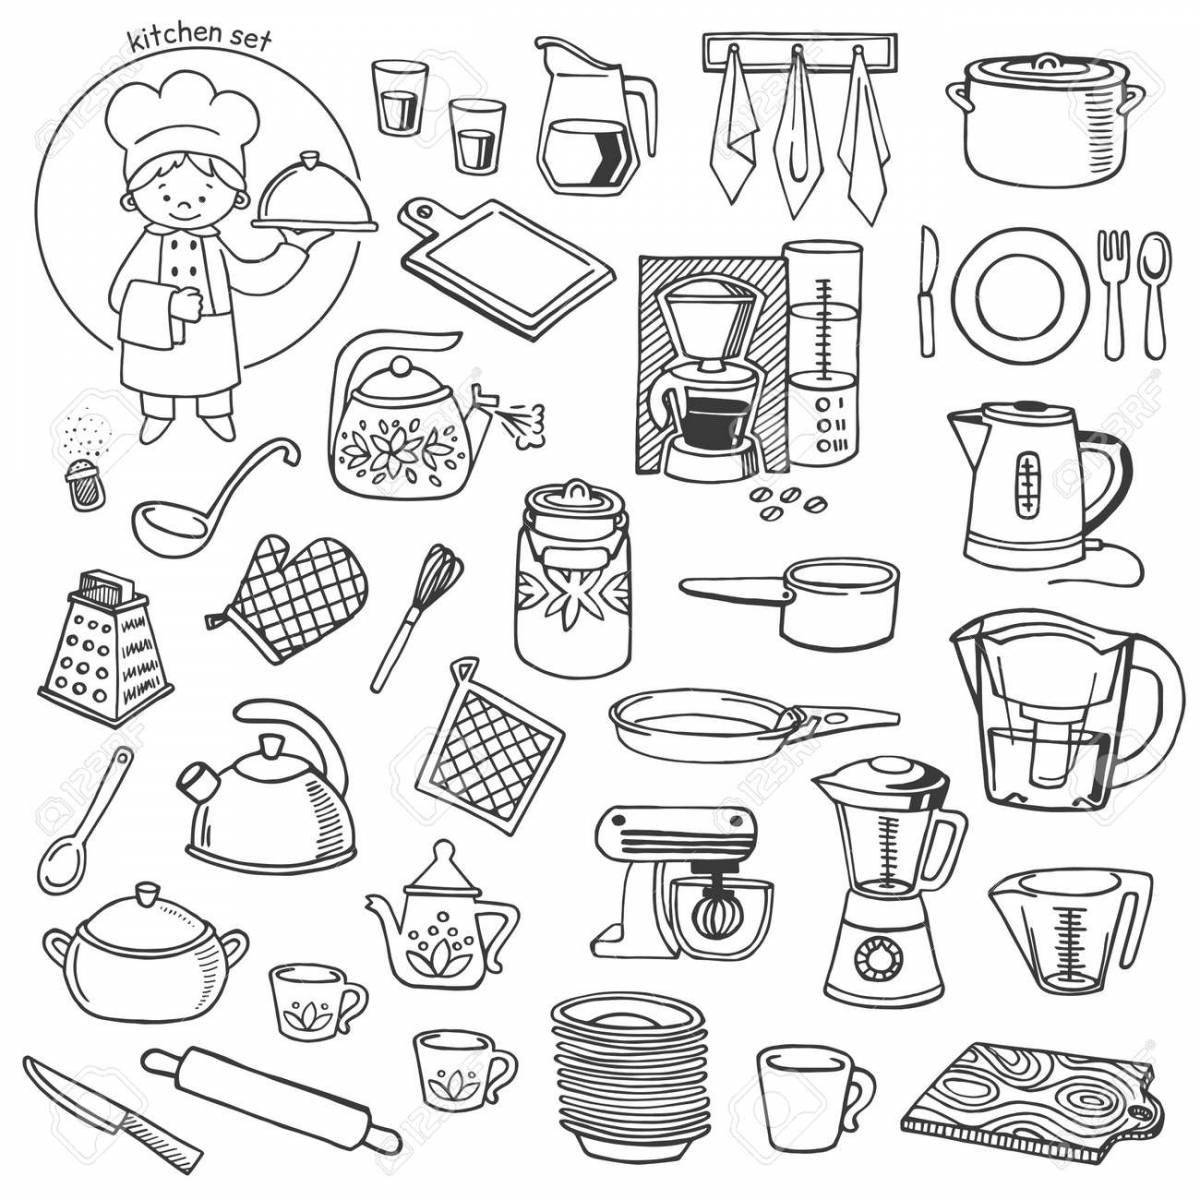 Dishes and food #11